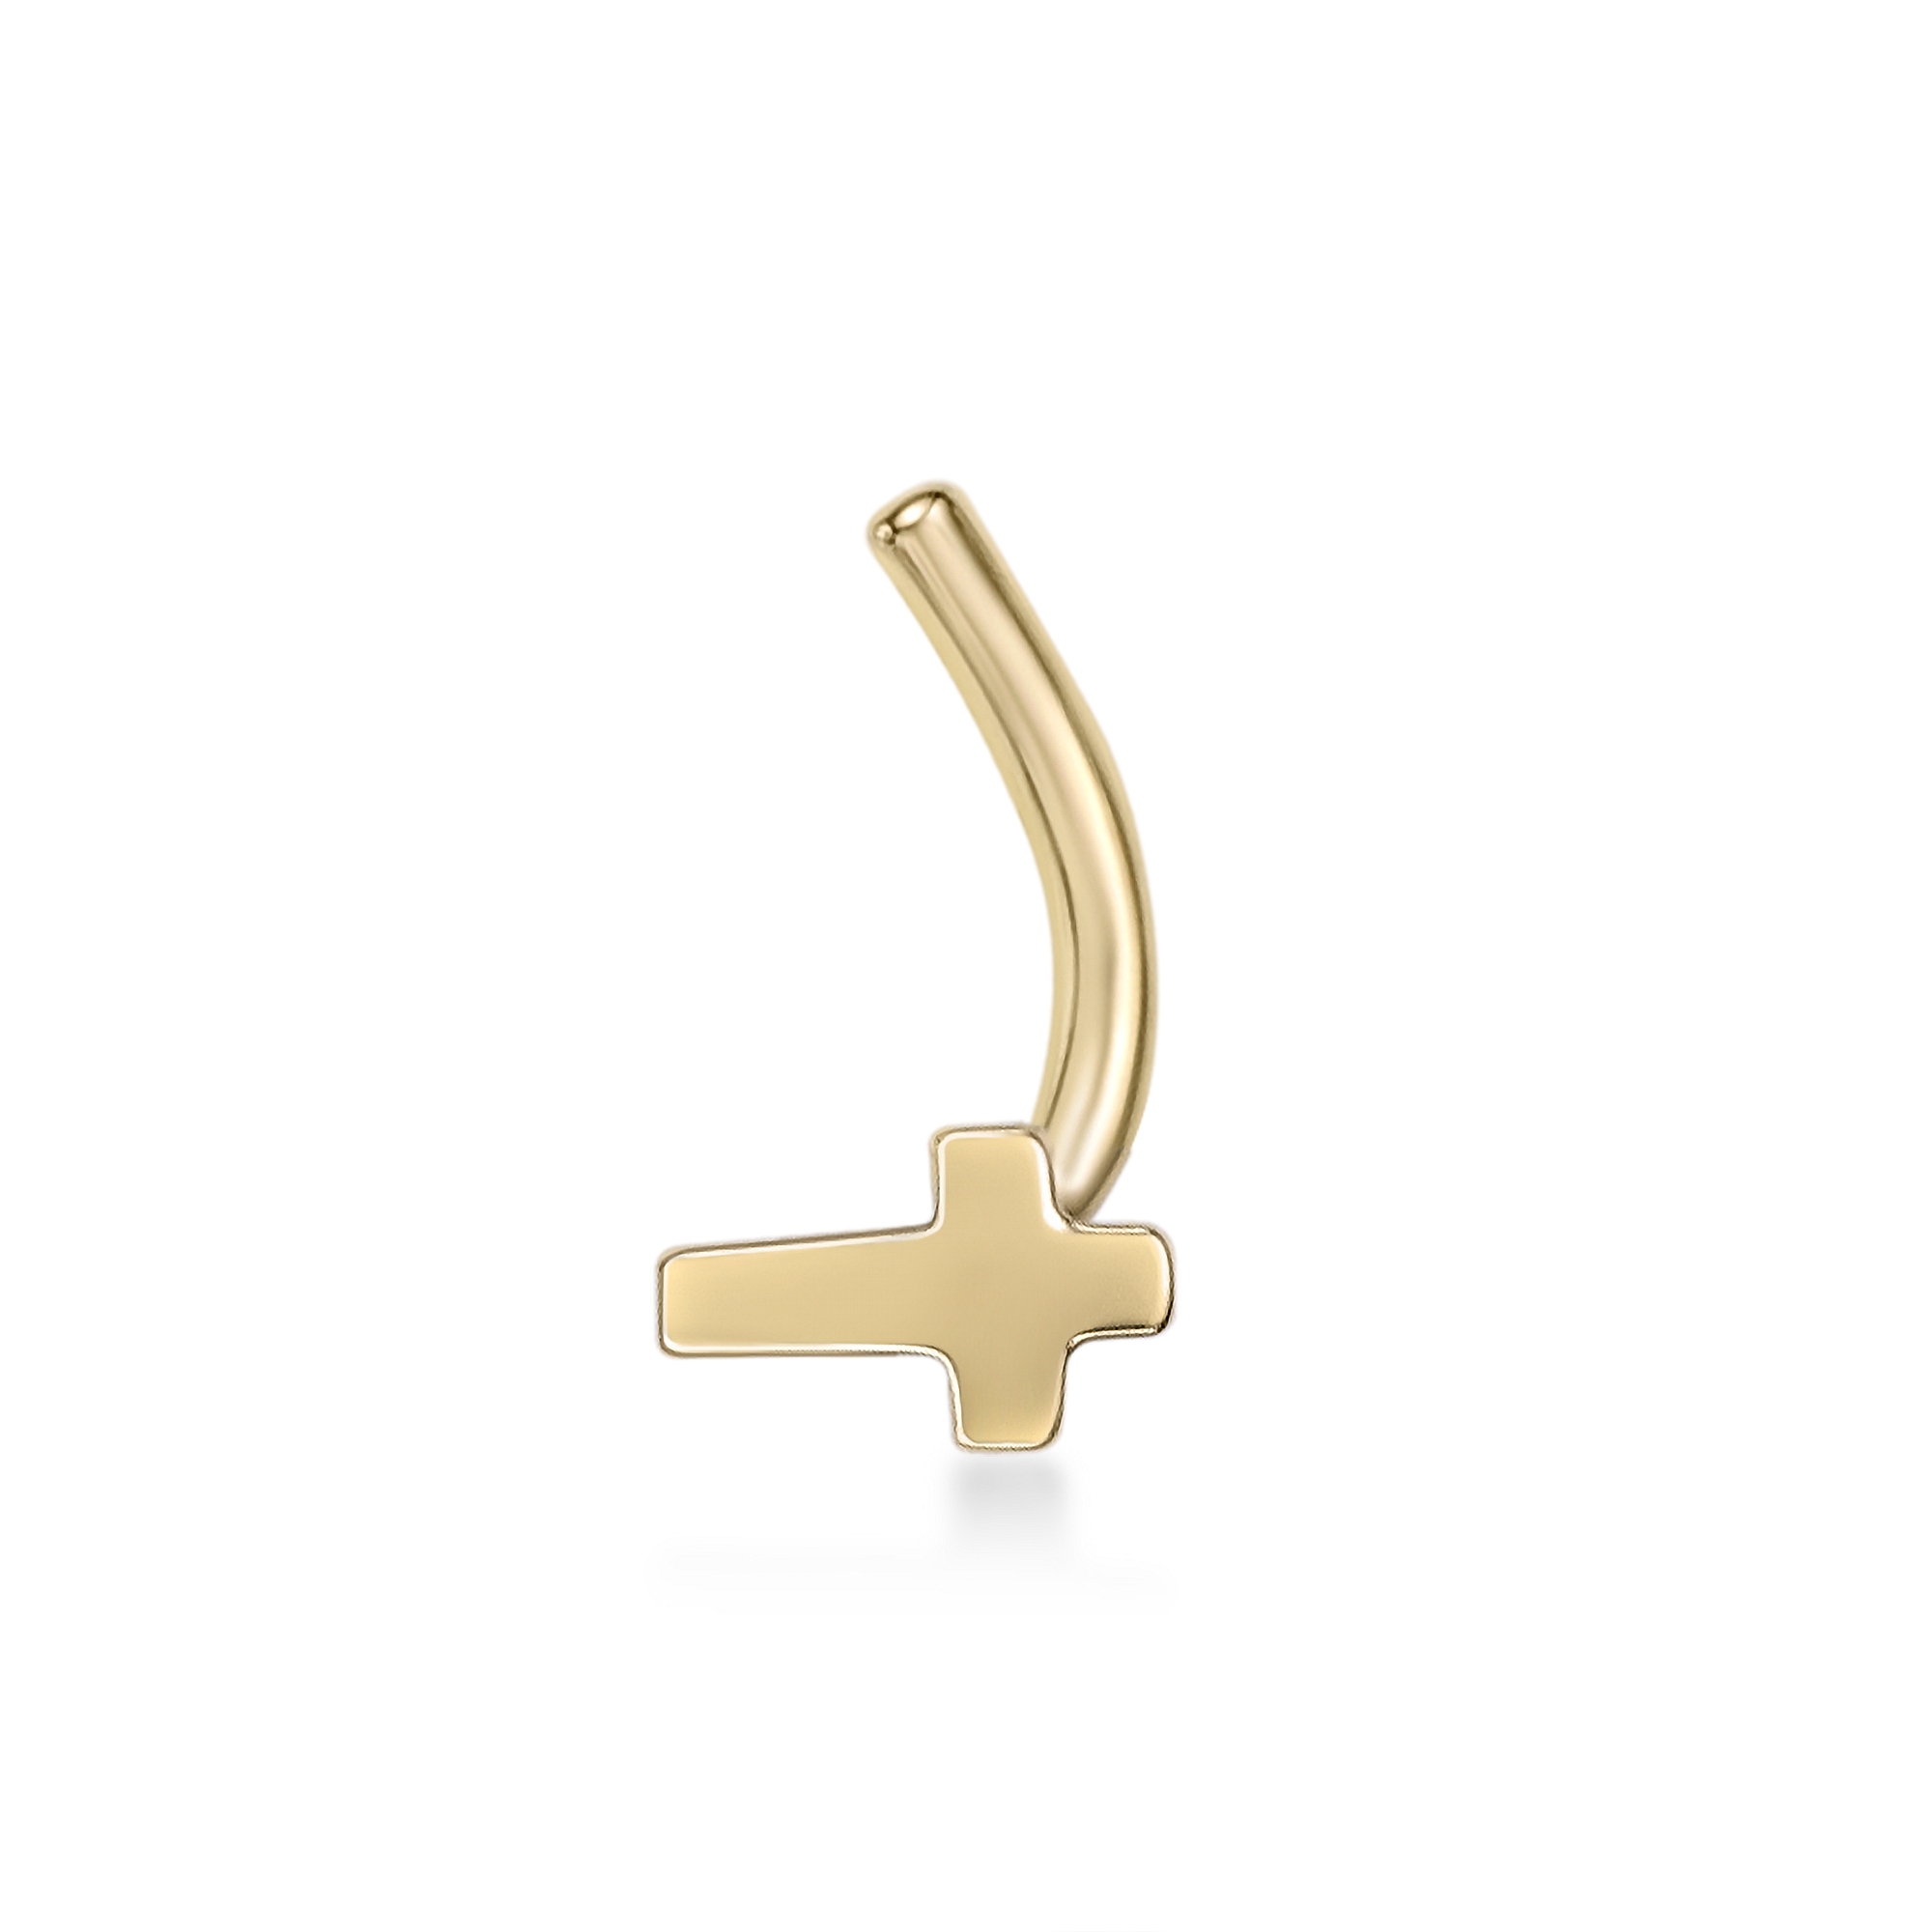 52371-nose-ring-default-collection-yellow-gold-52371.jpg